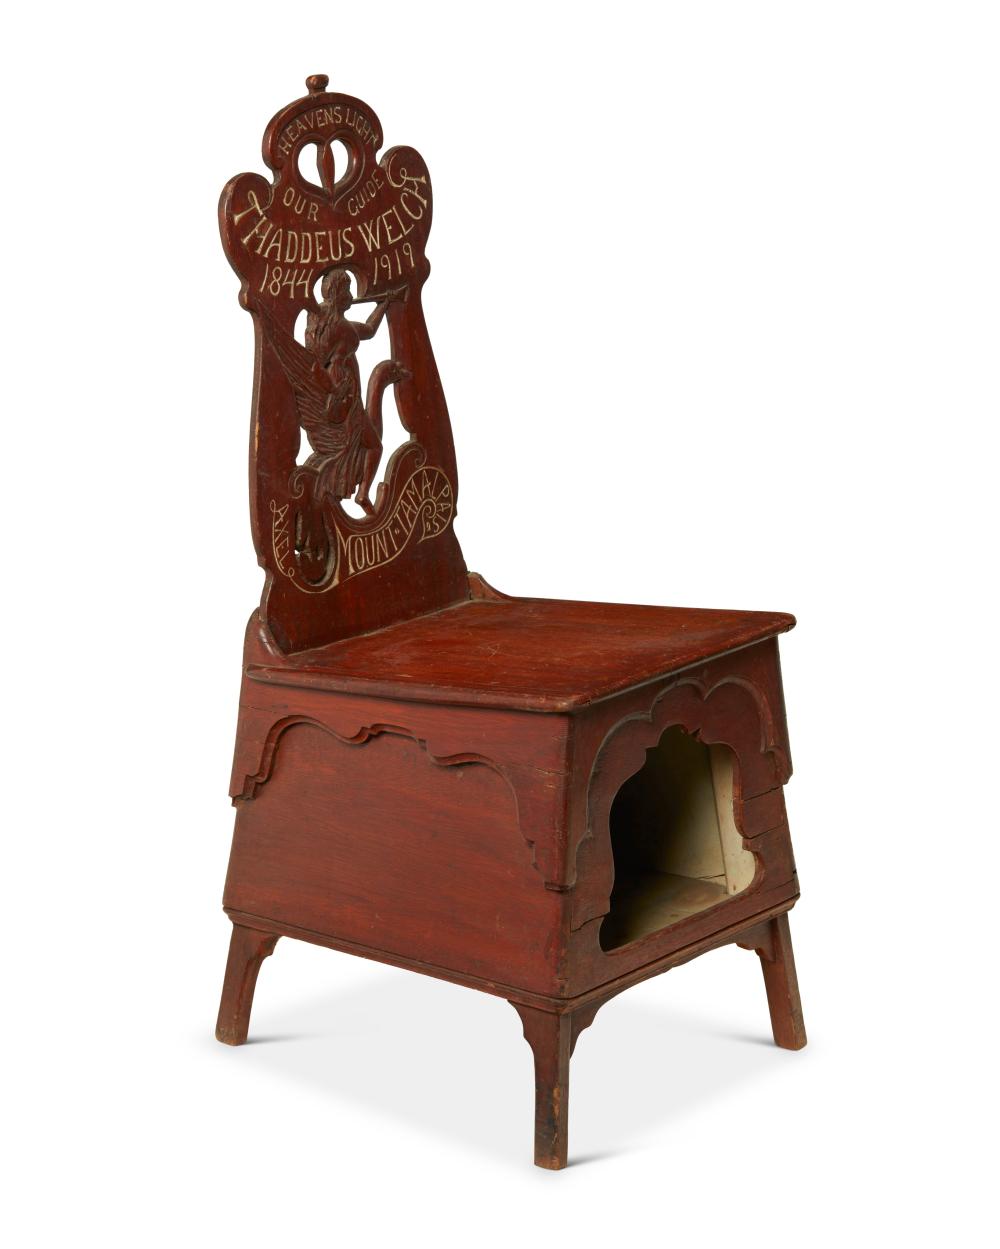 A CARVED SIDE CHAIR COMMEMORATING